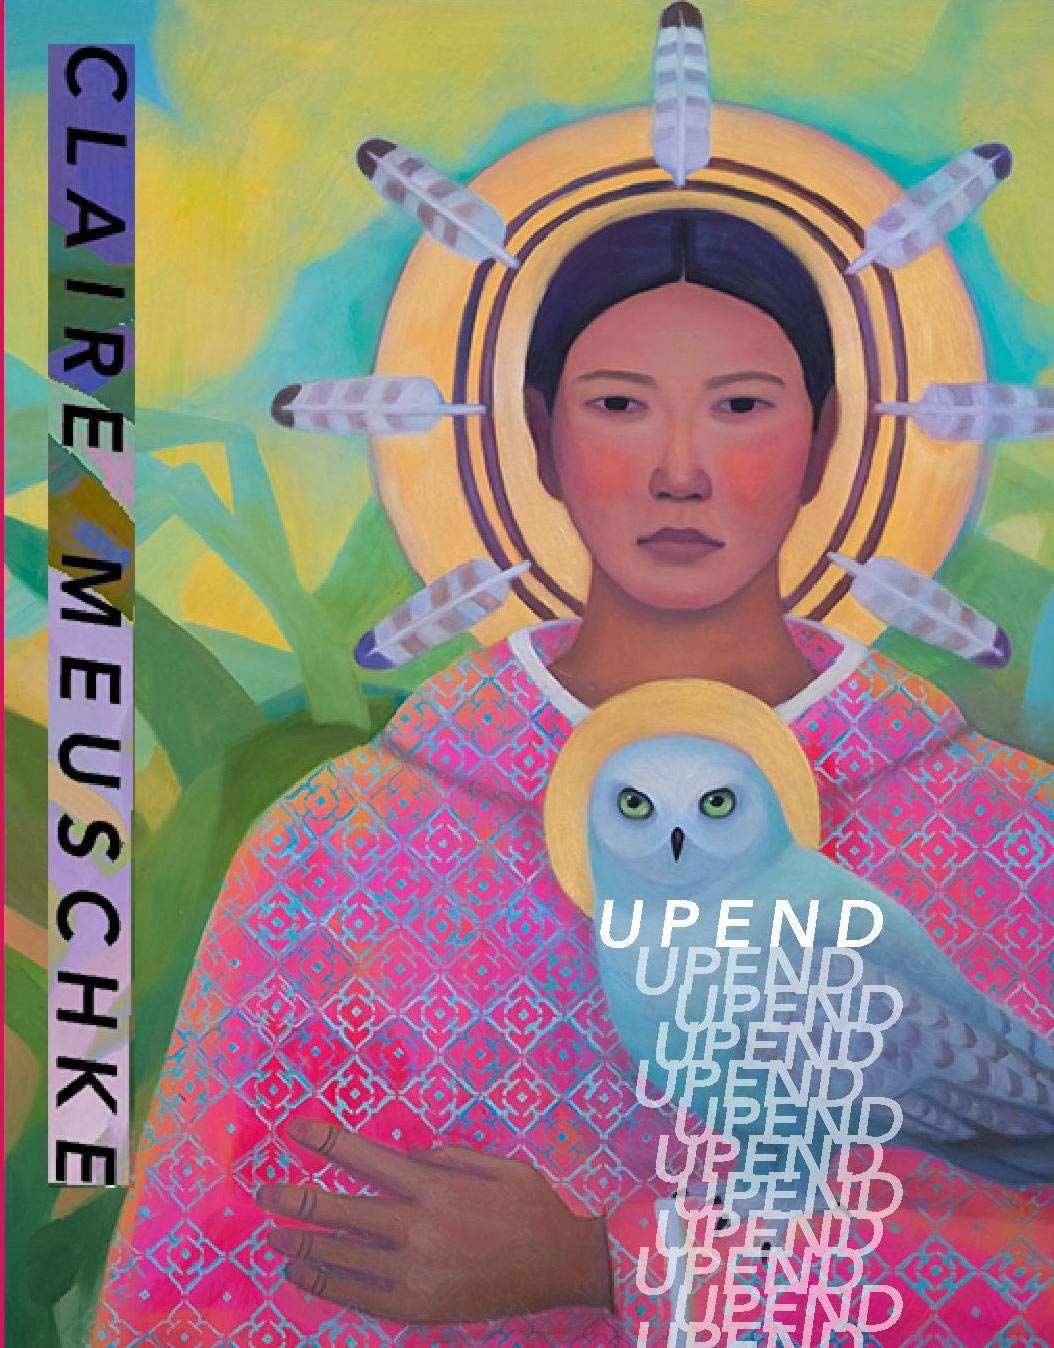 “There Are No Angels — Only Heavy Islands”: On Claire Meuschke’s “Upend”